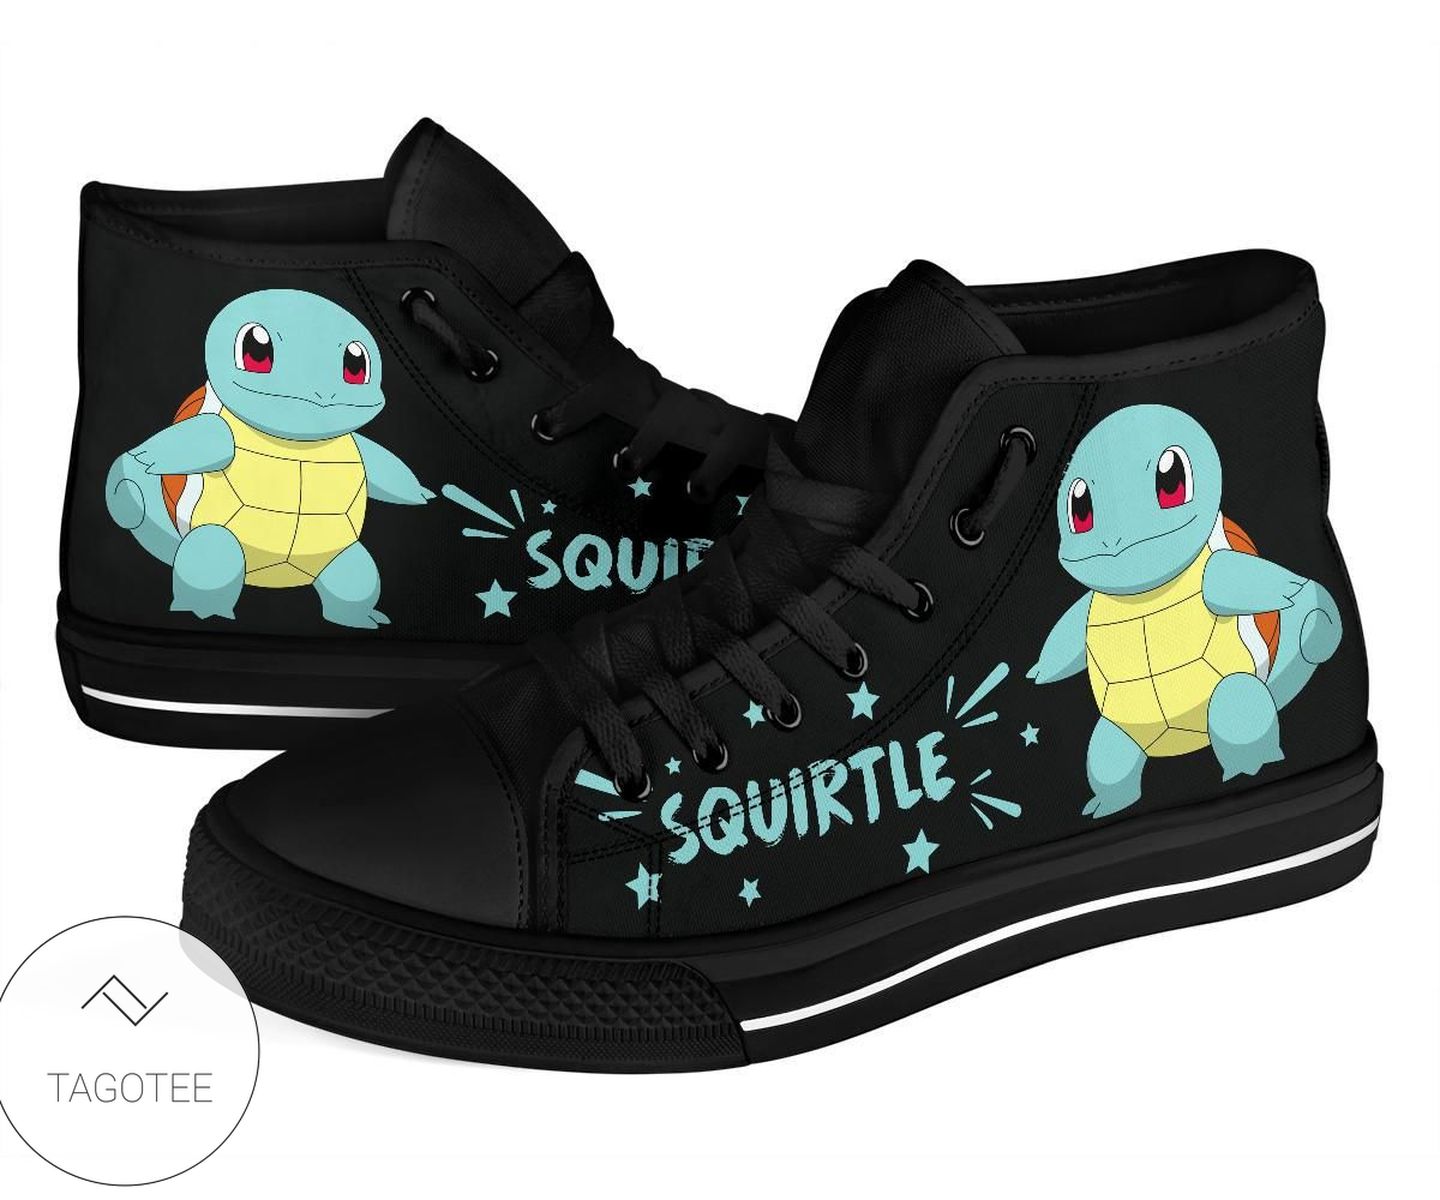 Squirtle Sneakers Pokemon High Top Shoes Gift Idea High Top Shoes